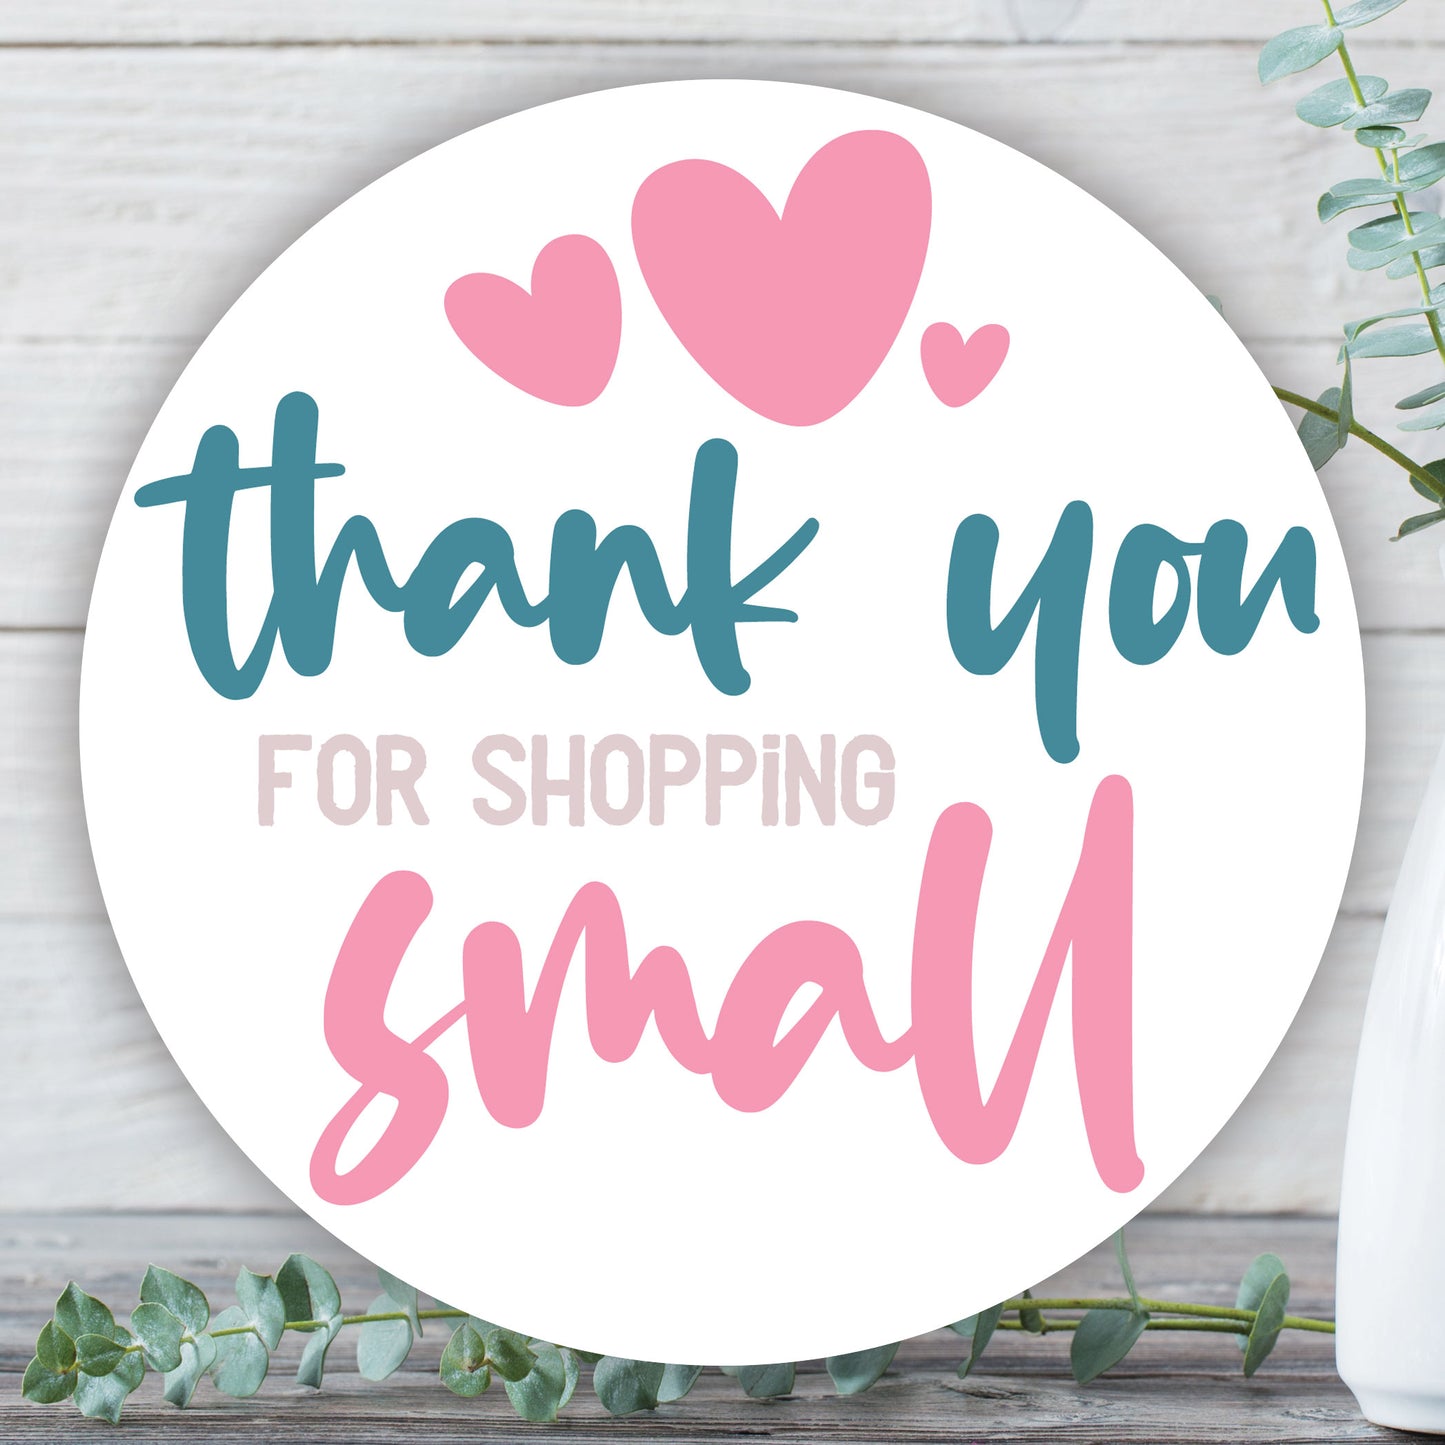 Thank You For Shopping Small Sticker